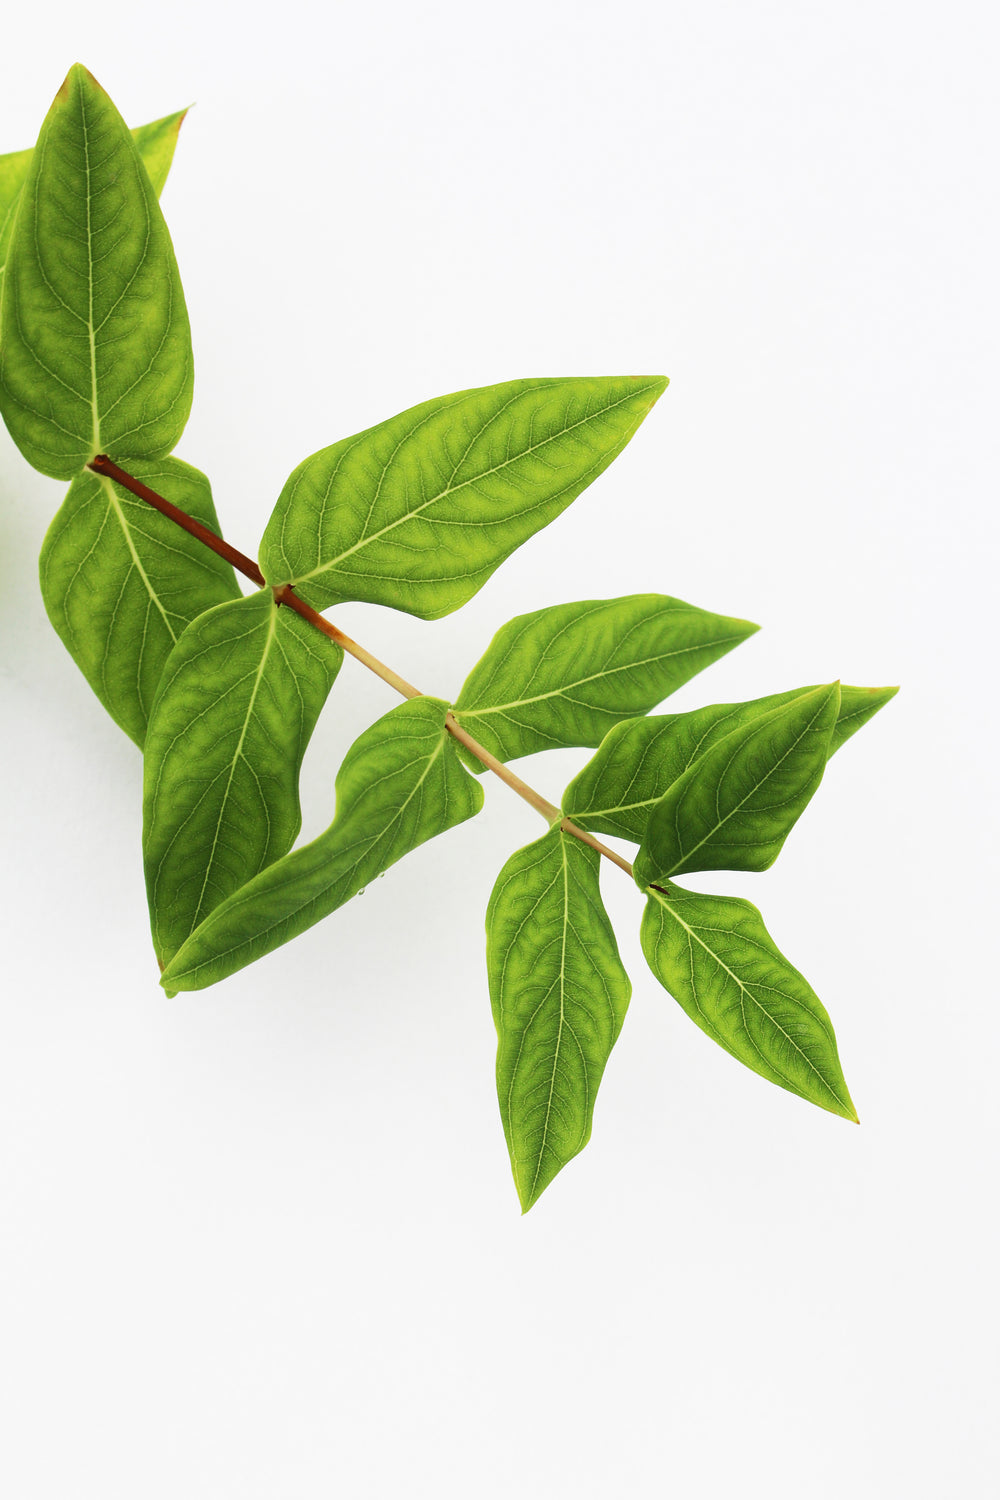 plant branch with green leaves